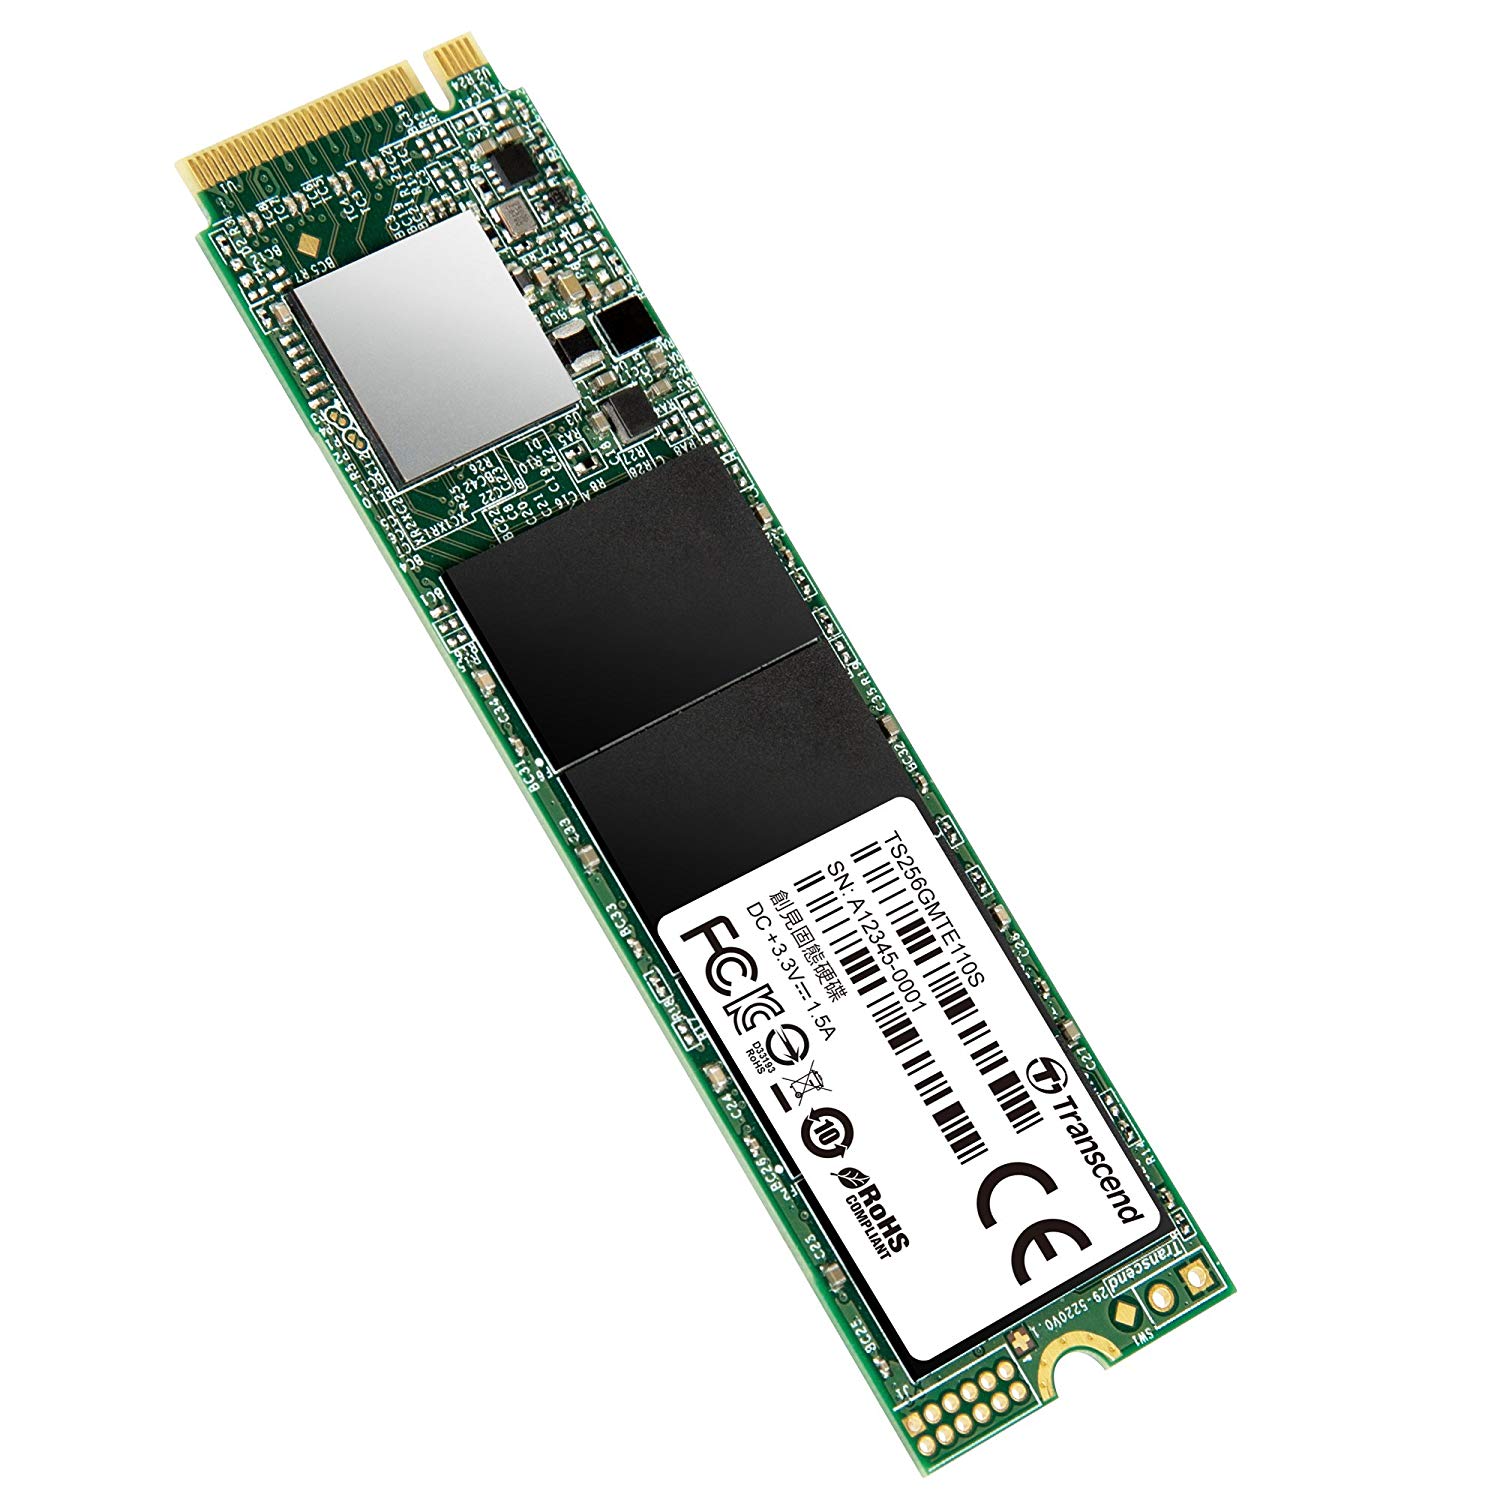 Transcend M.2 PCIe 110S Solid State Drive - 256GB Price in Pakistan